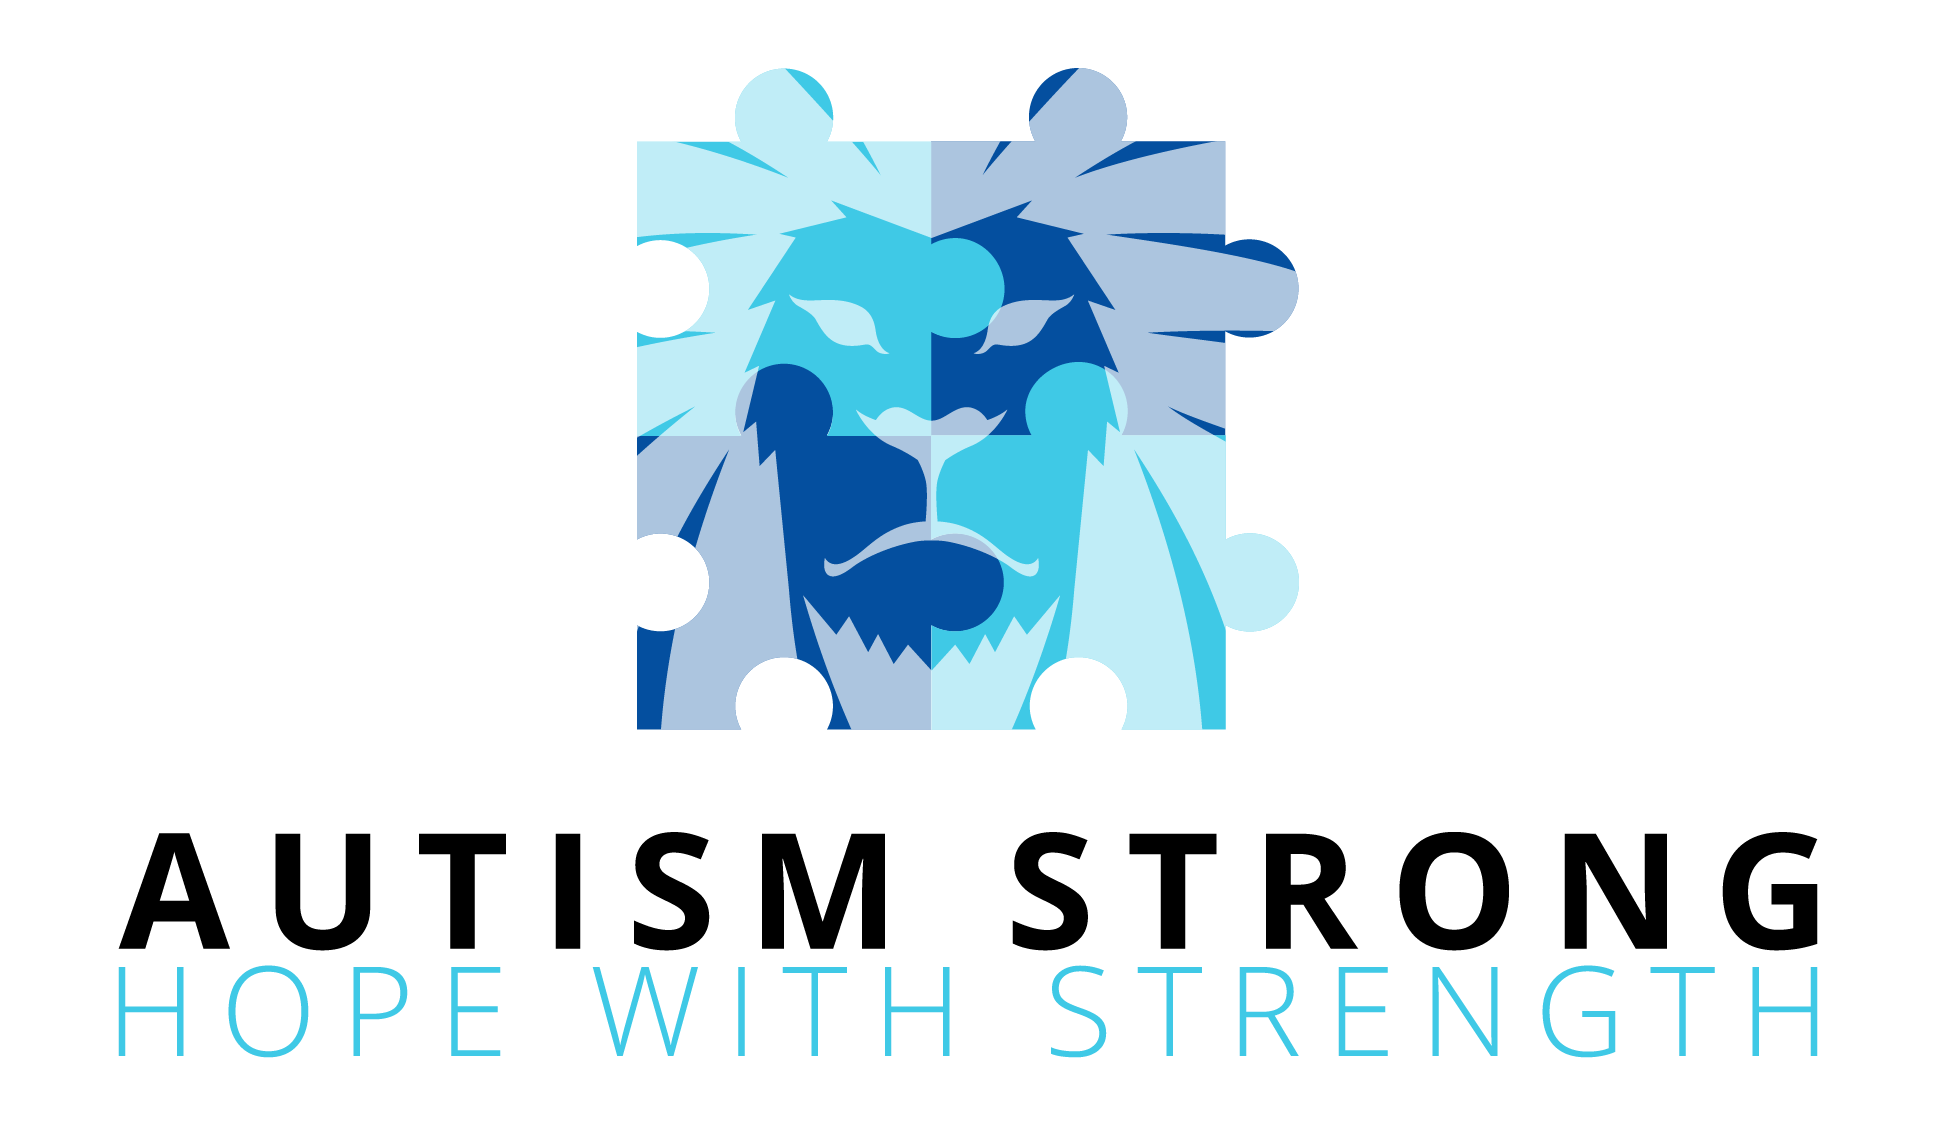 Autism Strong Foundation